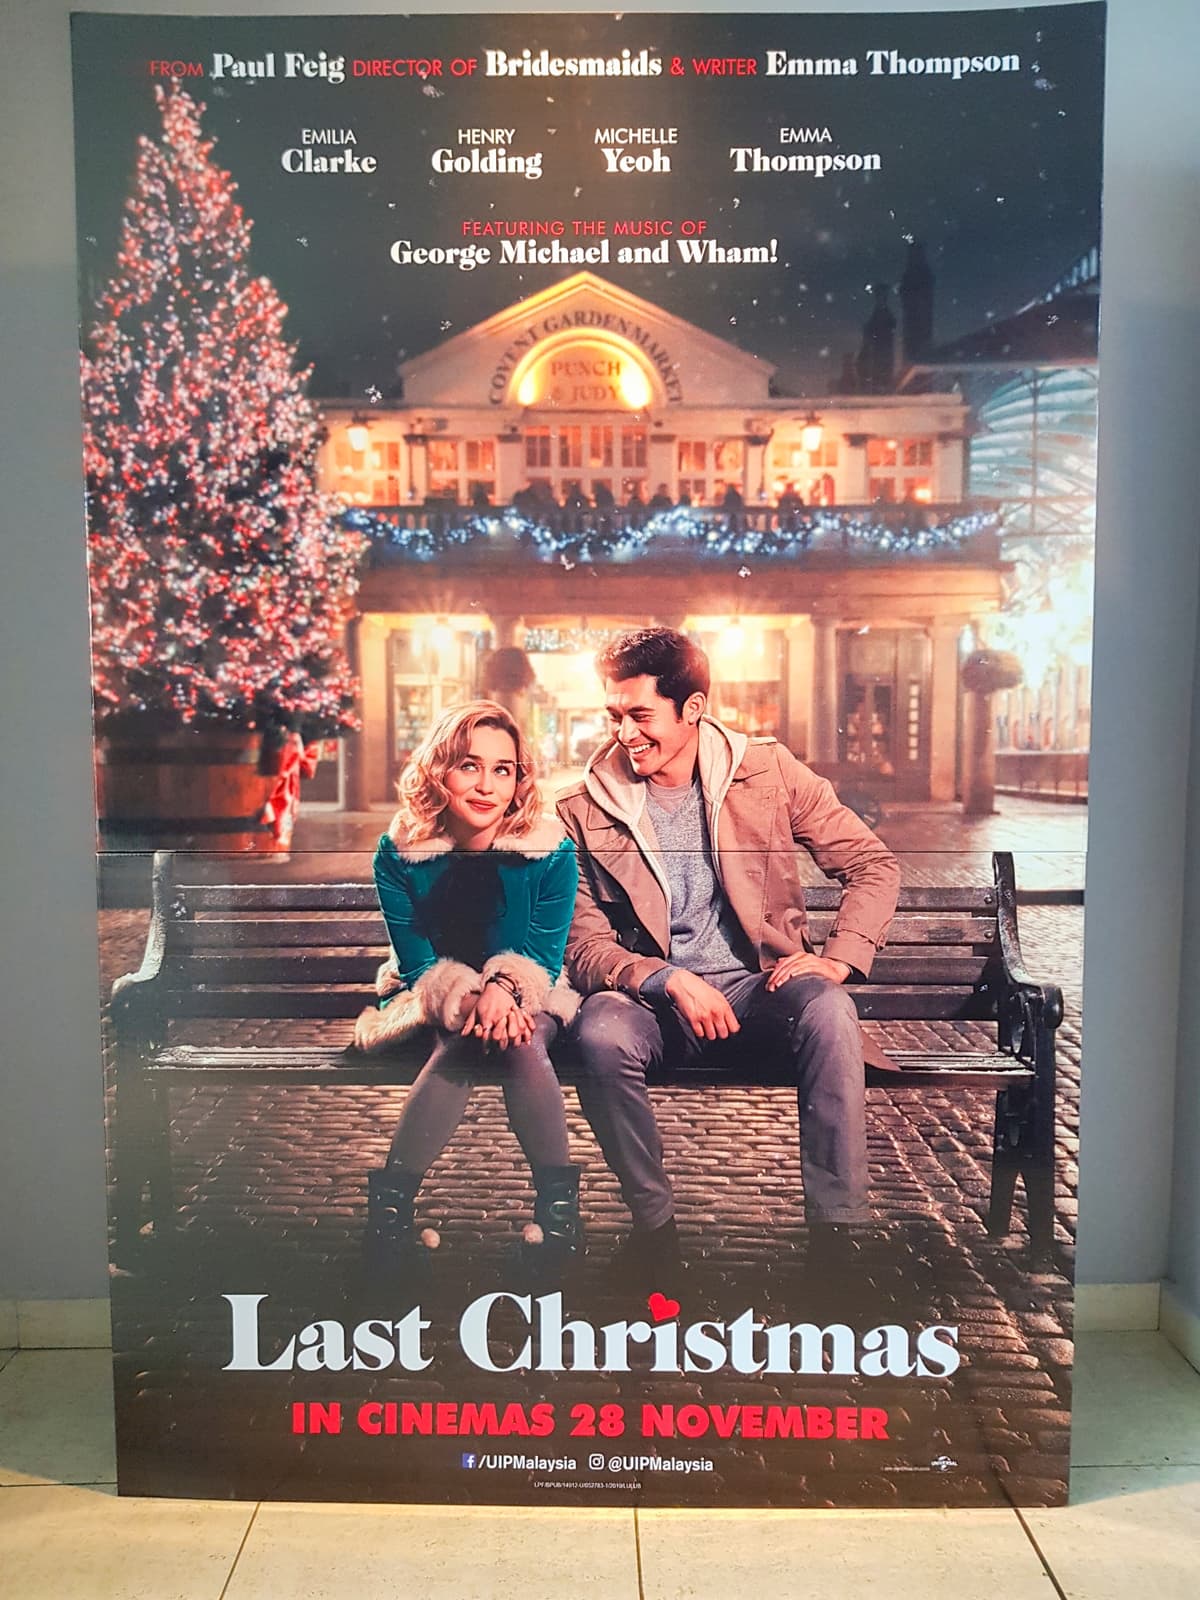 Last Christmas was a box office success despite mixed reviews from critics